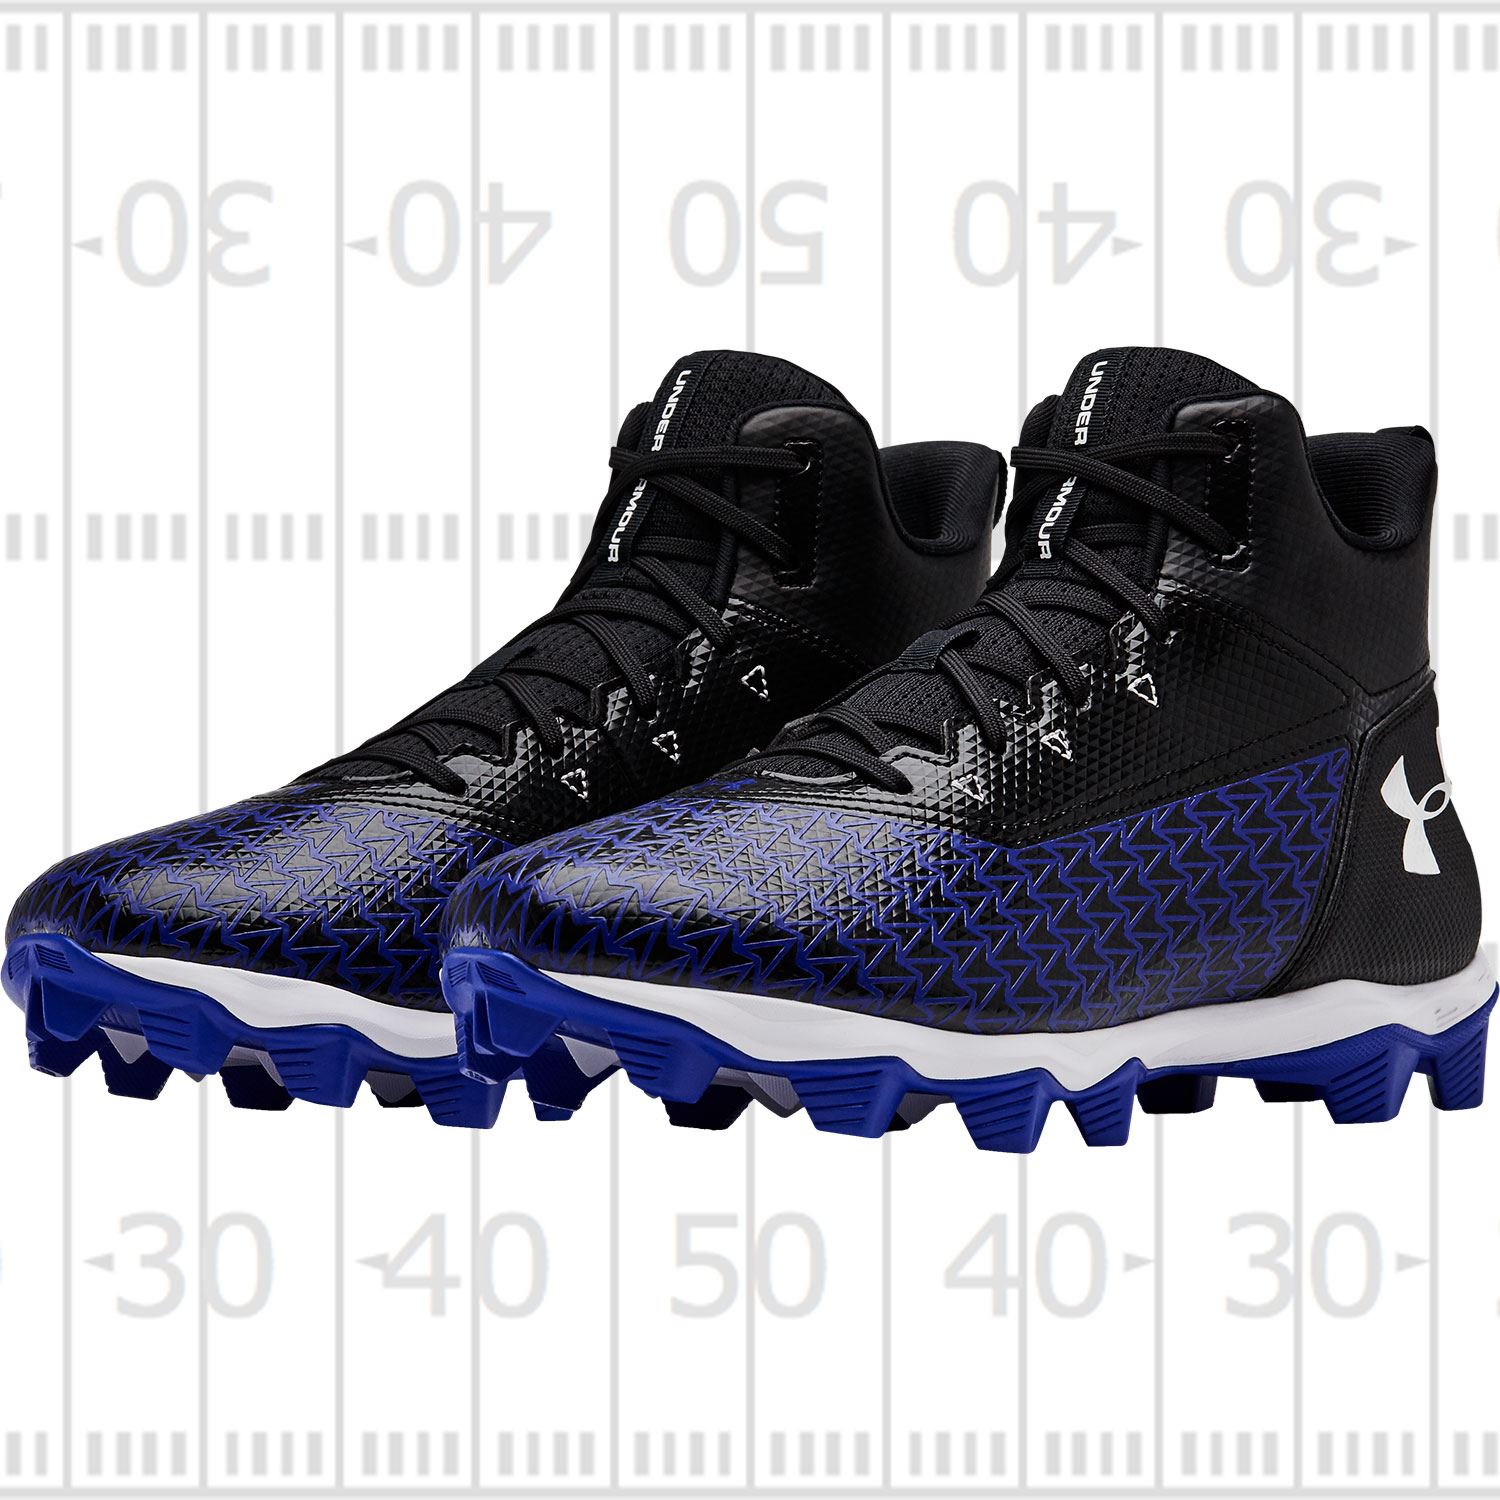 Under Armour Men's Hammer Mid RM Football Cleats NIB Choose your size & color 